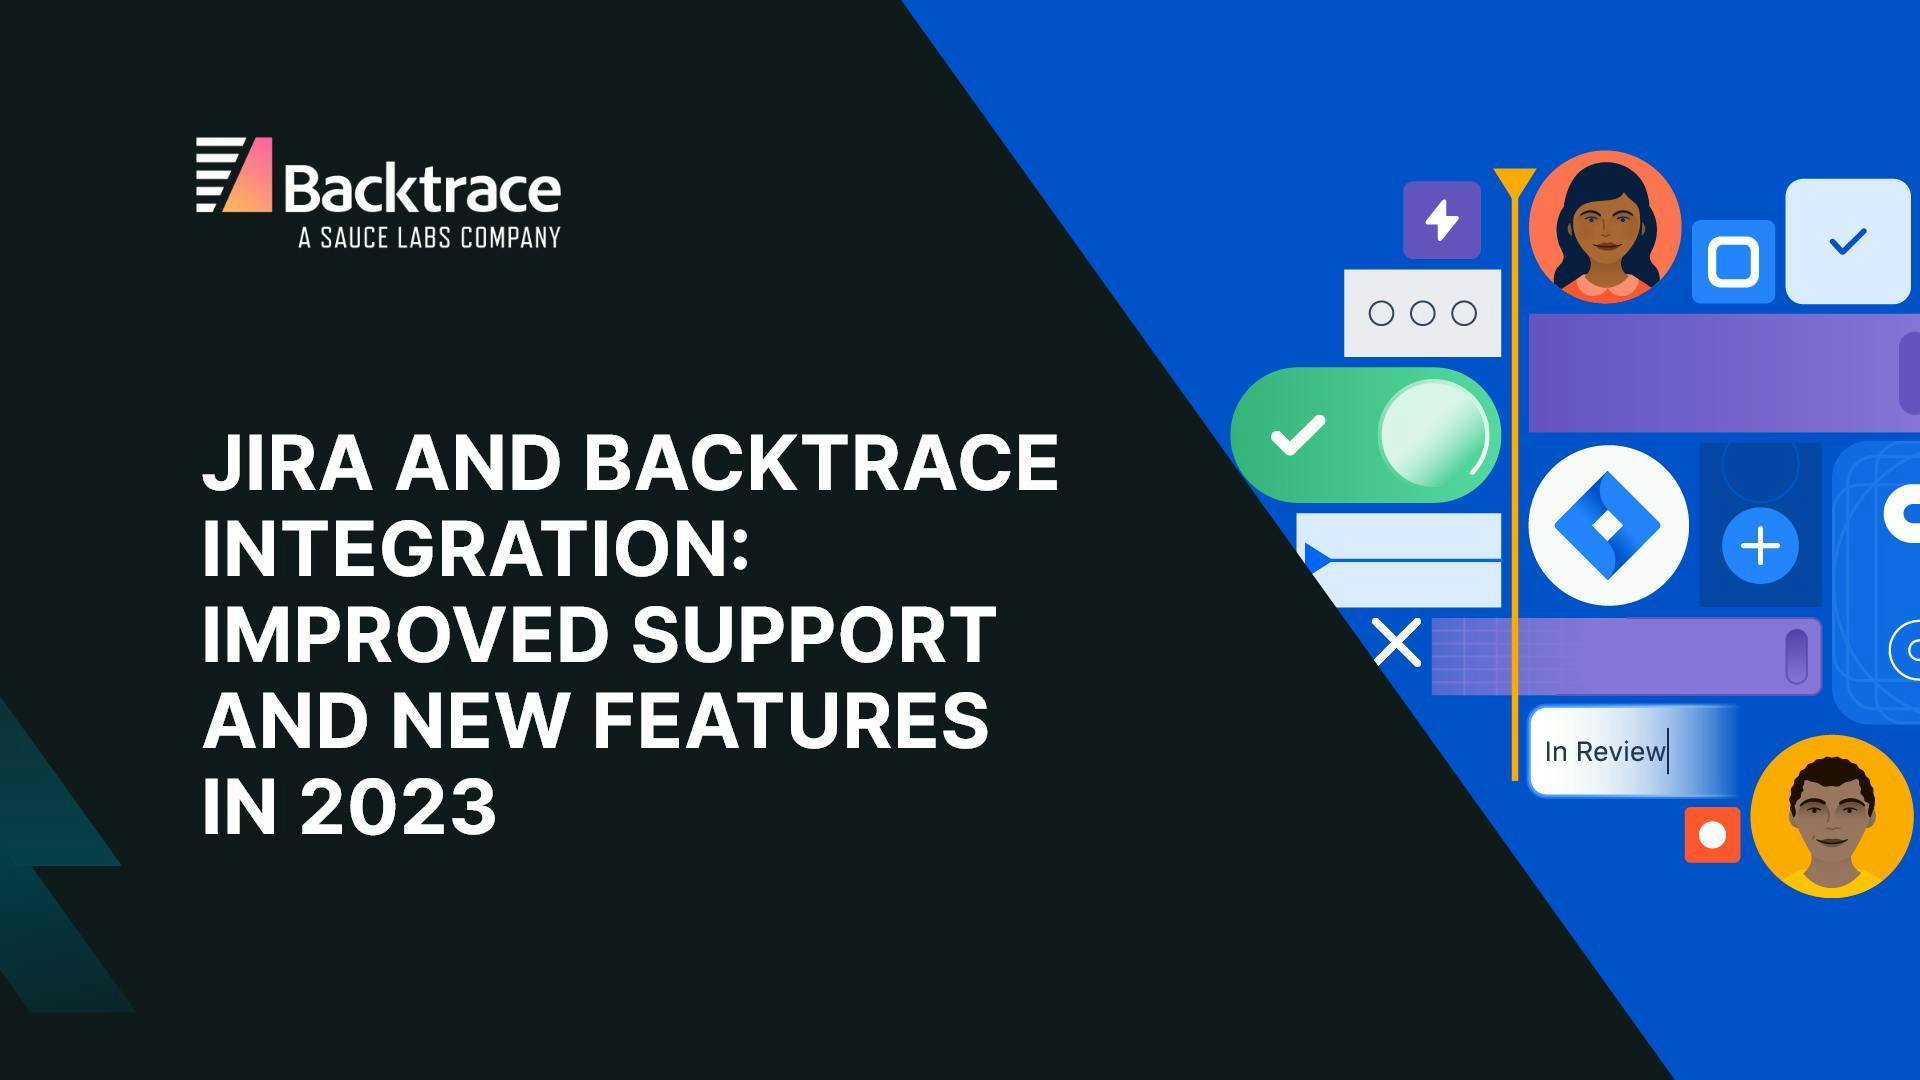 Thumbnail image for blog post: Backtrace Improvements and New Features in 2023: Improved Jira Integration